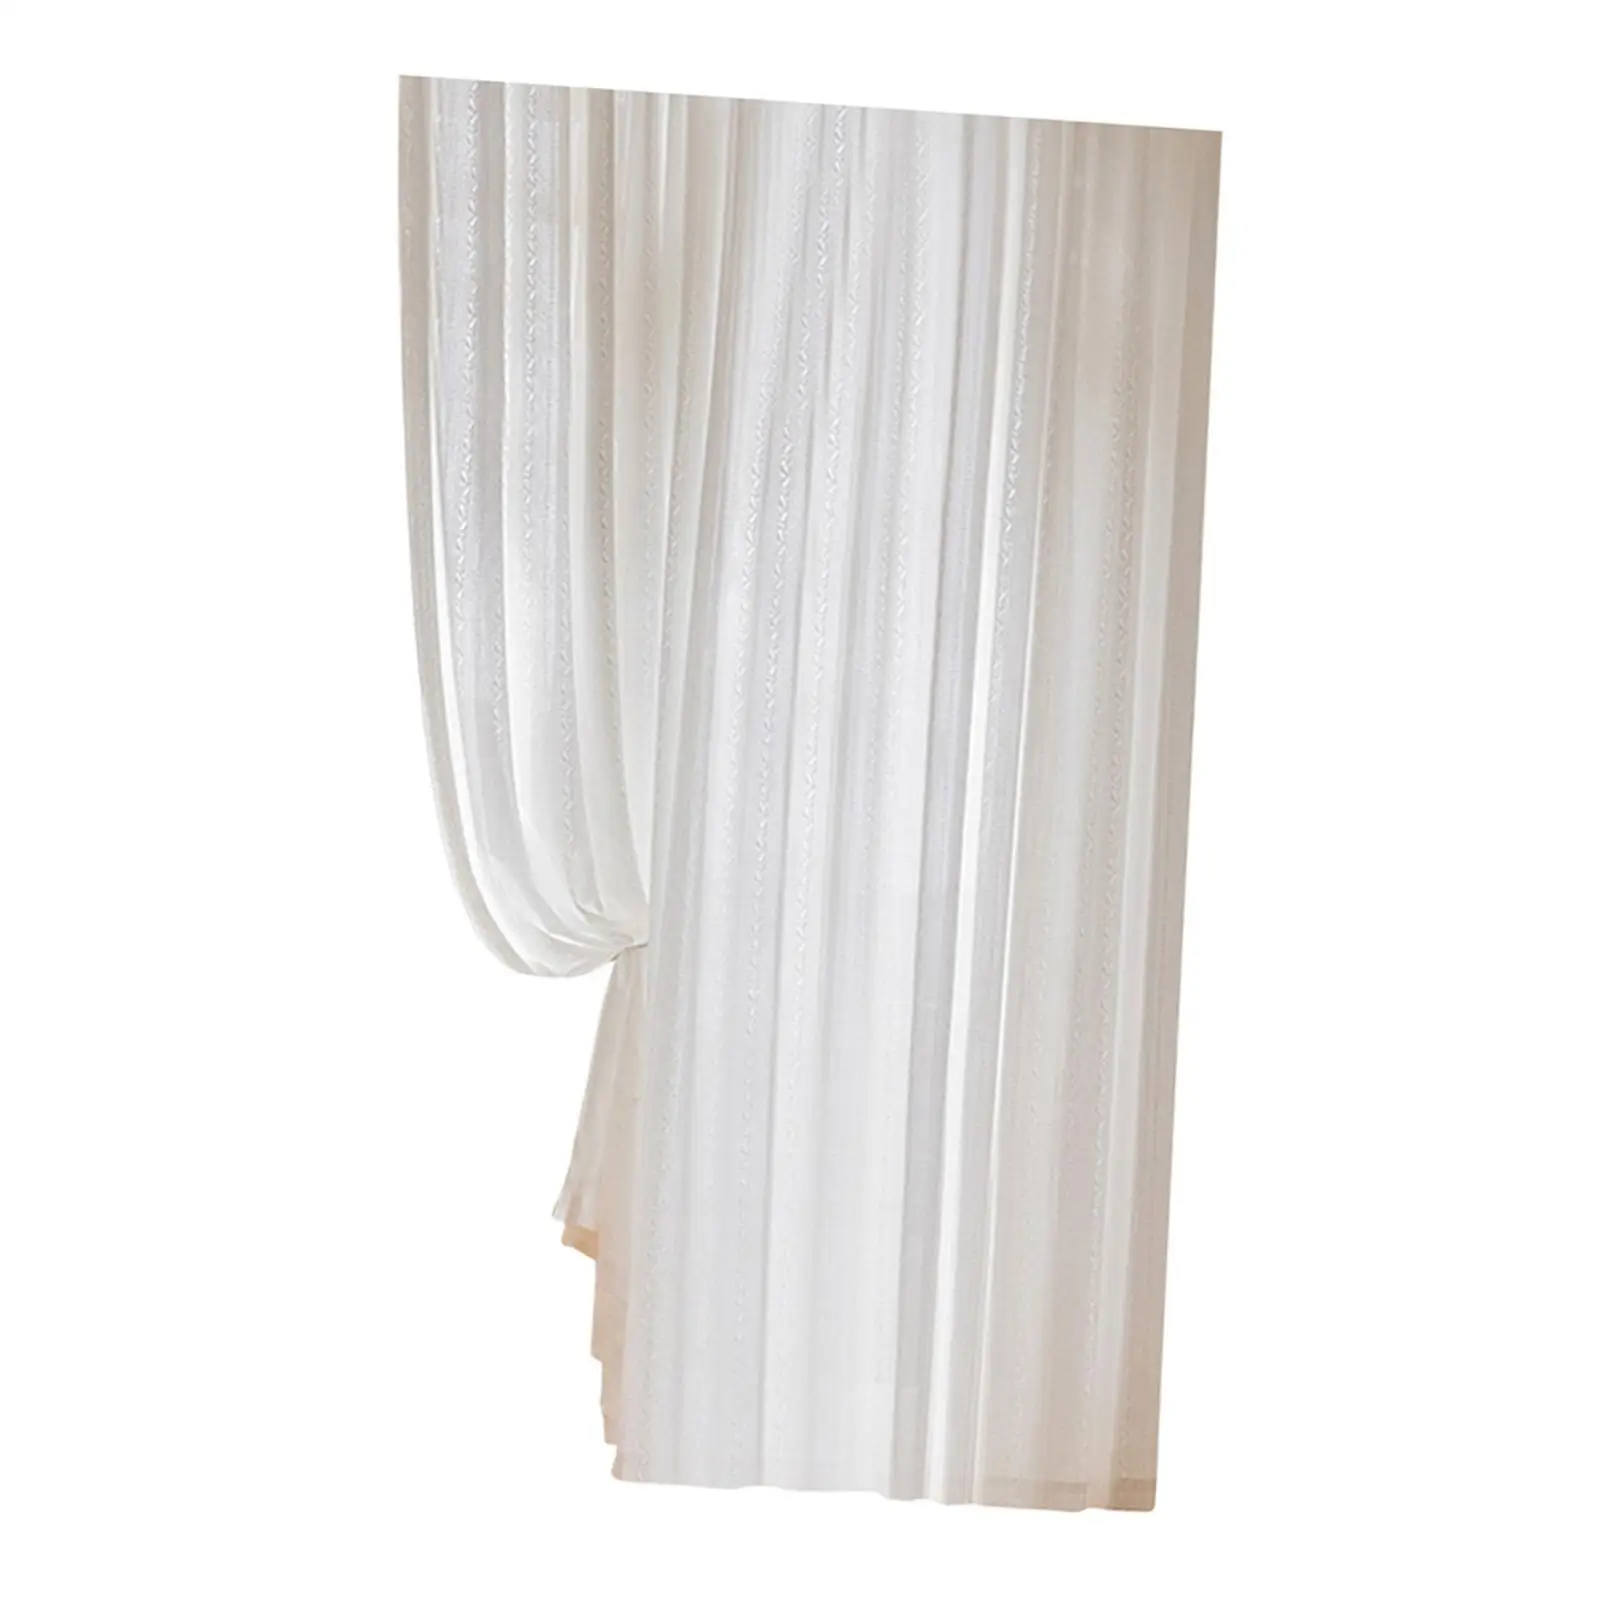 Curtains Door Curtain Rustic European Style Drapes Curtain Panels for Bedroom Study Restaurant Dining Room Decoration